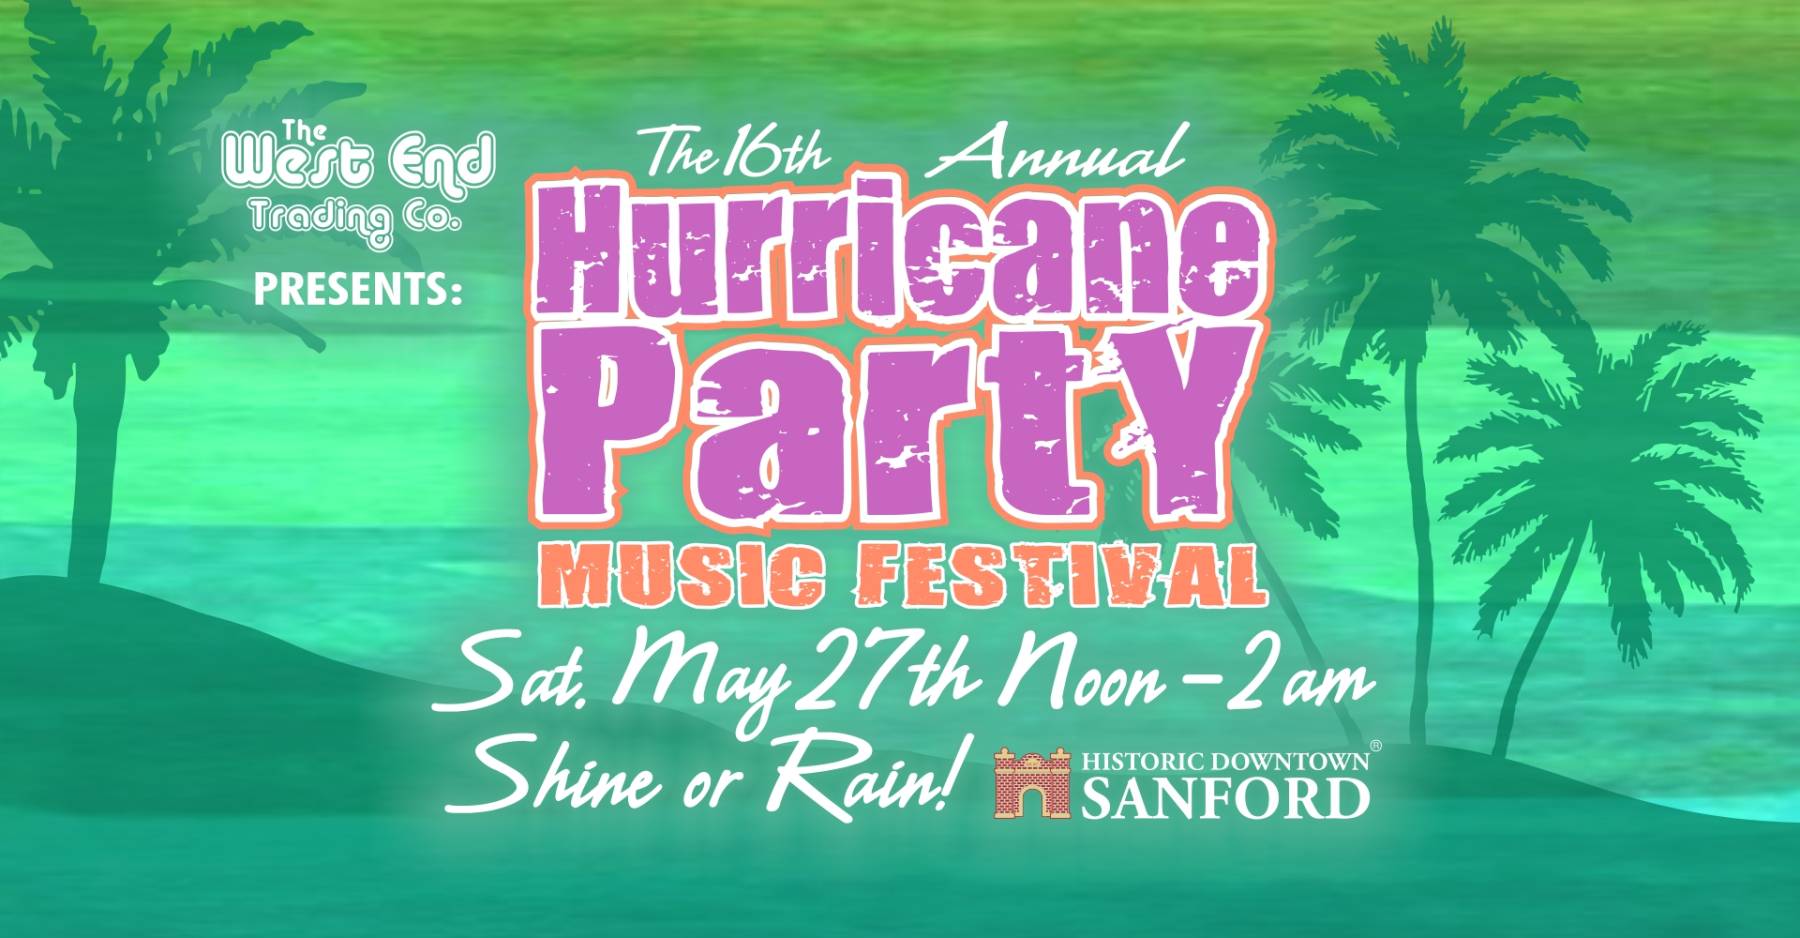 16th Annual Hurricane Party Music Festival in Historic Downtown Sanford